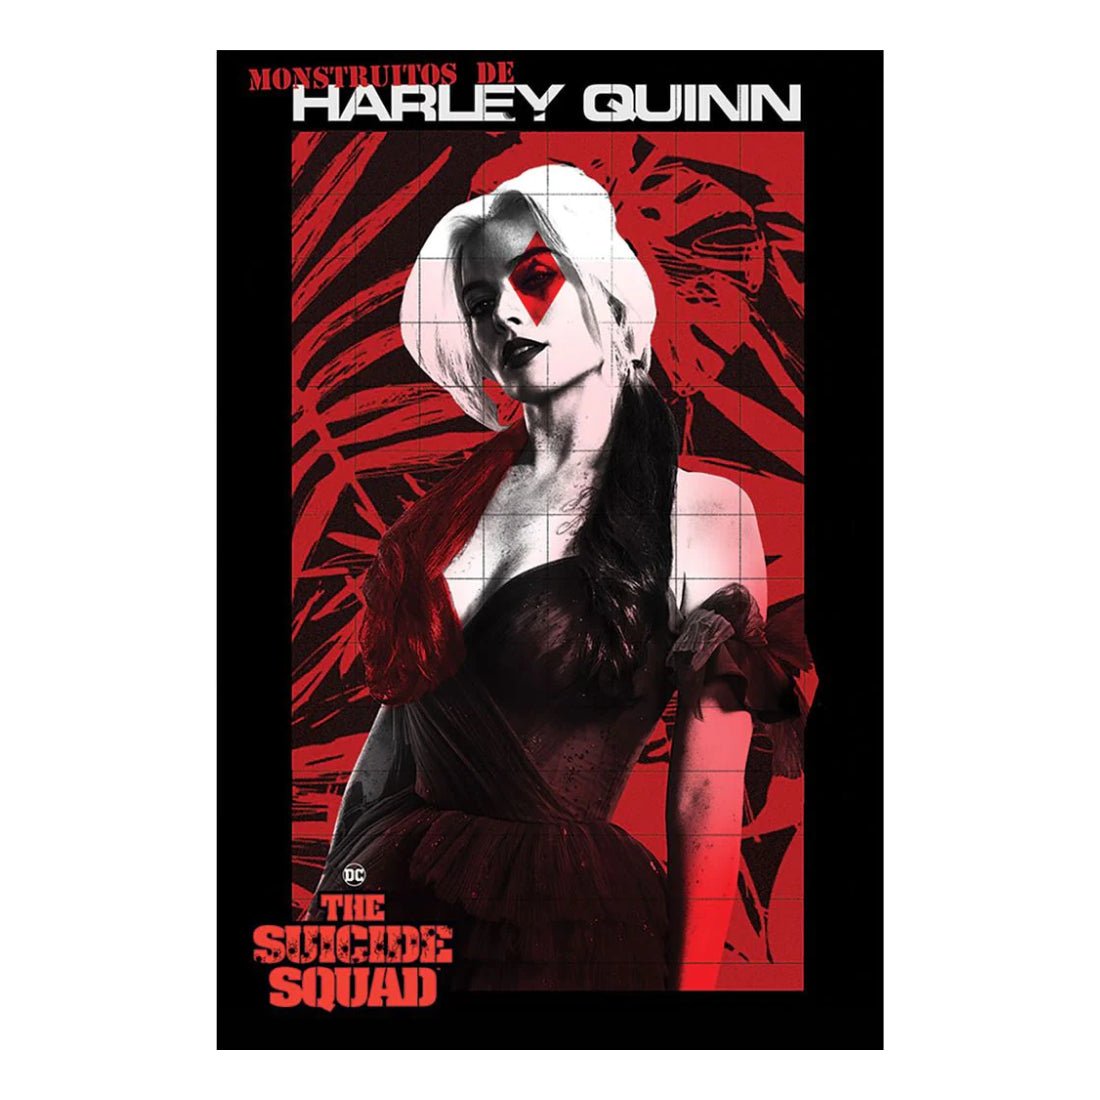 The Suicide Squad - Monstruitos De Harley Quinn Maxi Posters - أكسسوار - Store 974 | ستور ٩٧٤